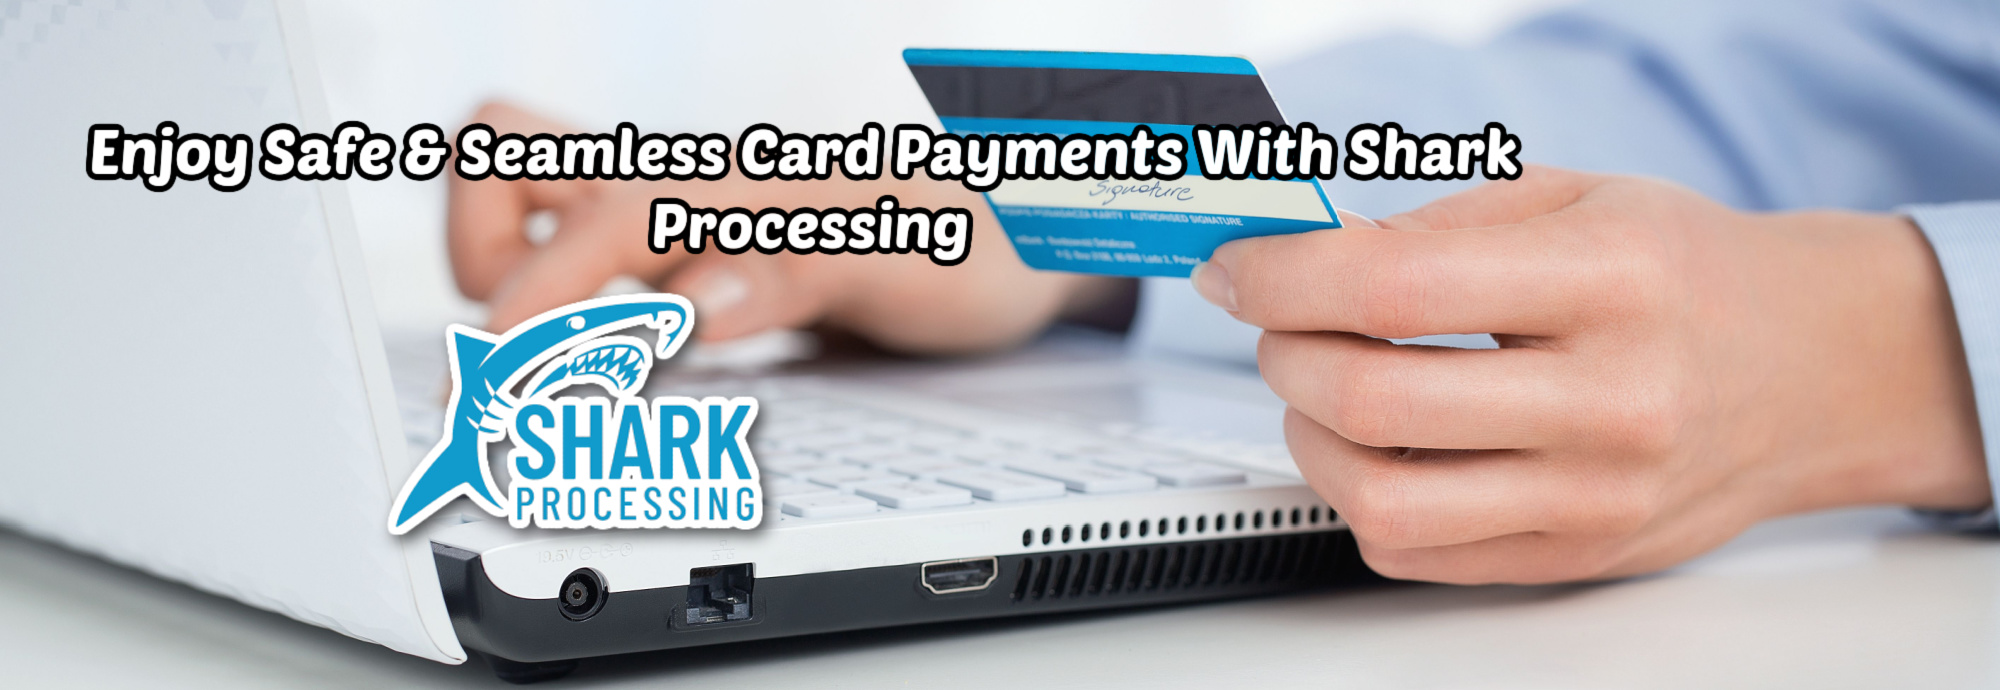 image safe & seamless card payments with shark processing